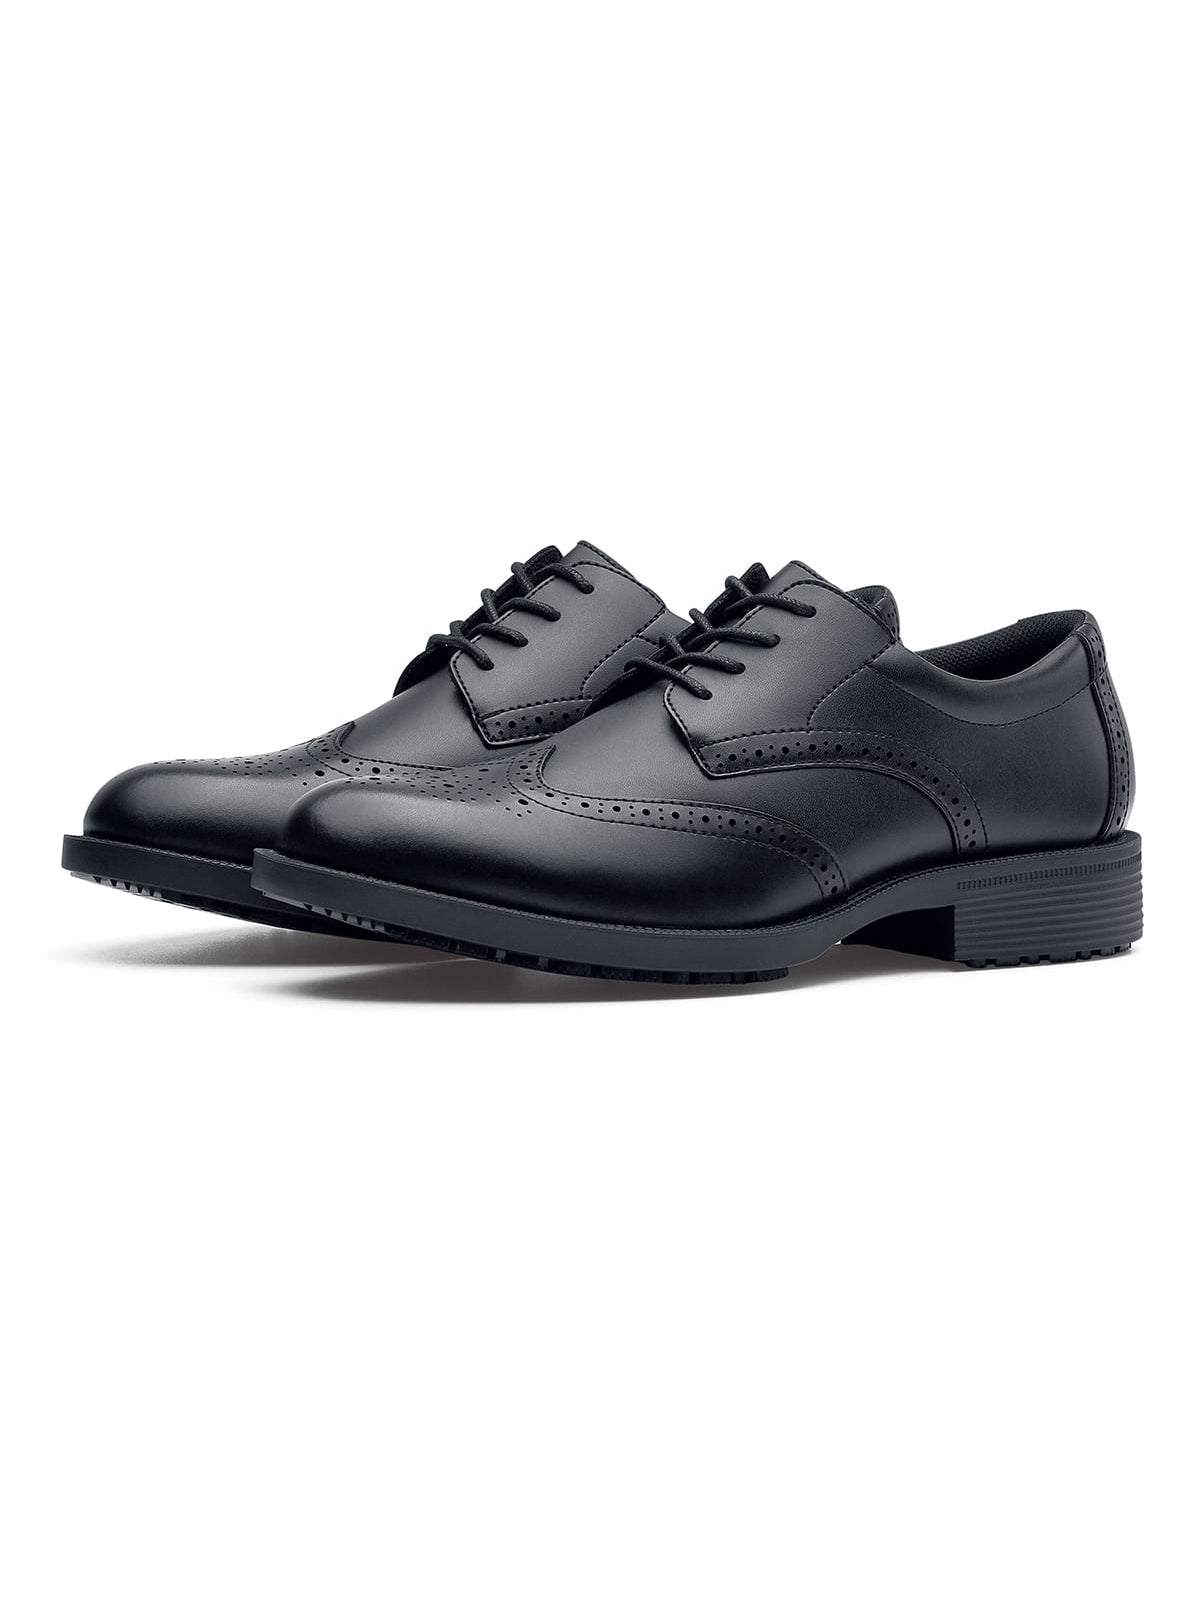 Men's Work Shoe Executive Wing Tip by  Shoes For Crews.